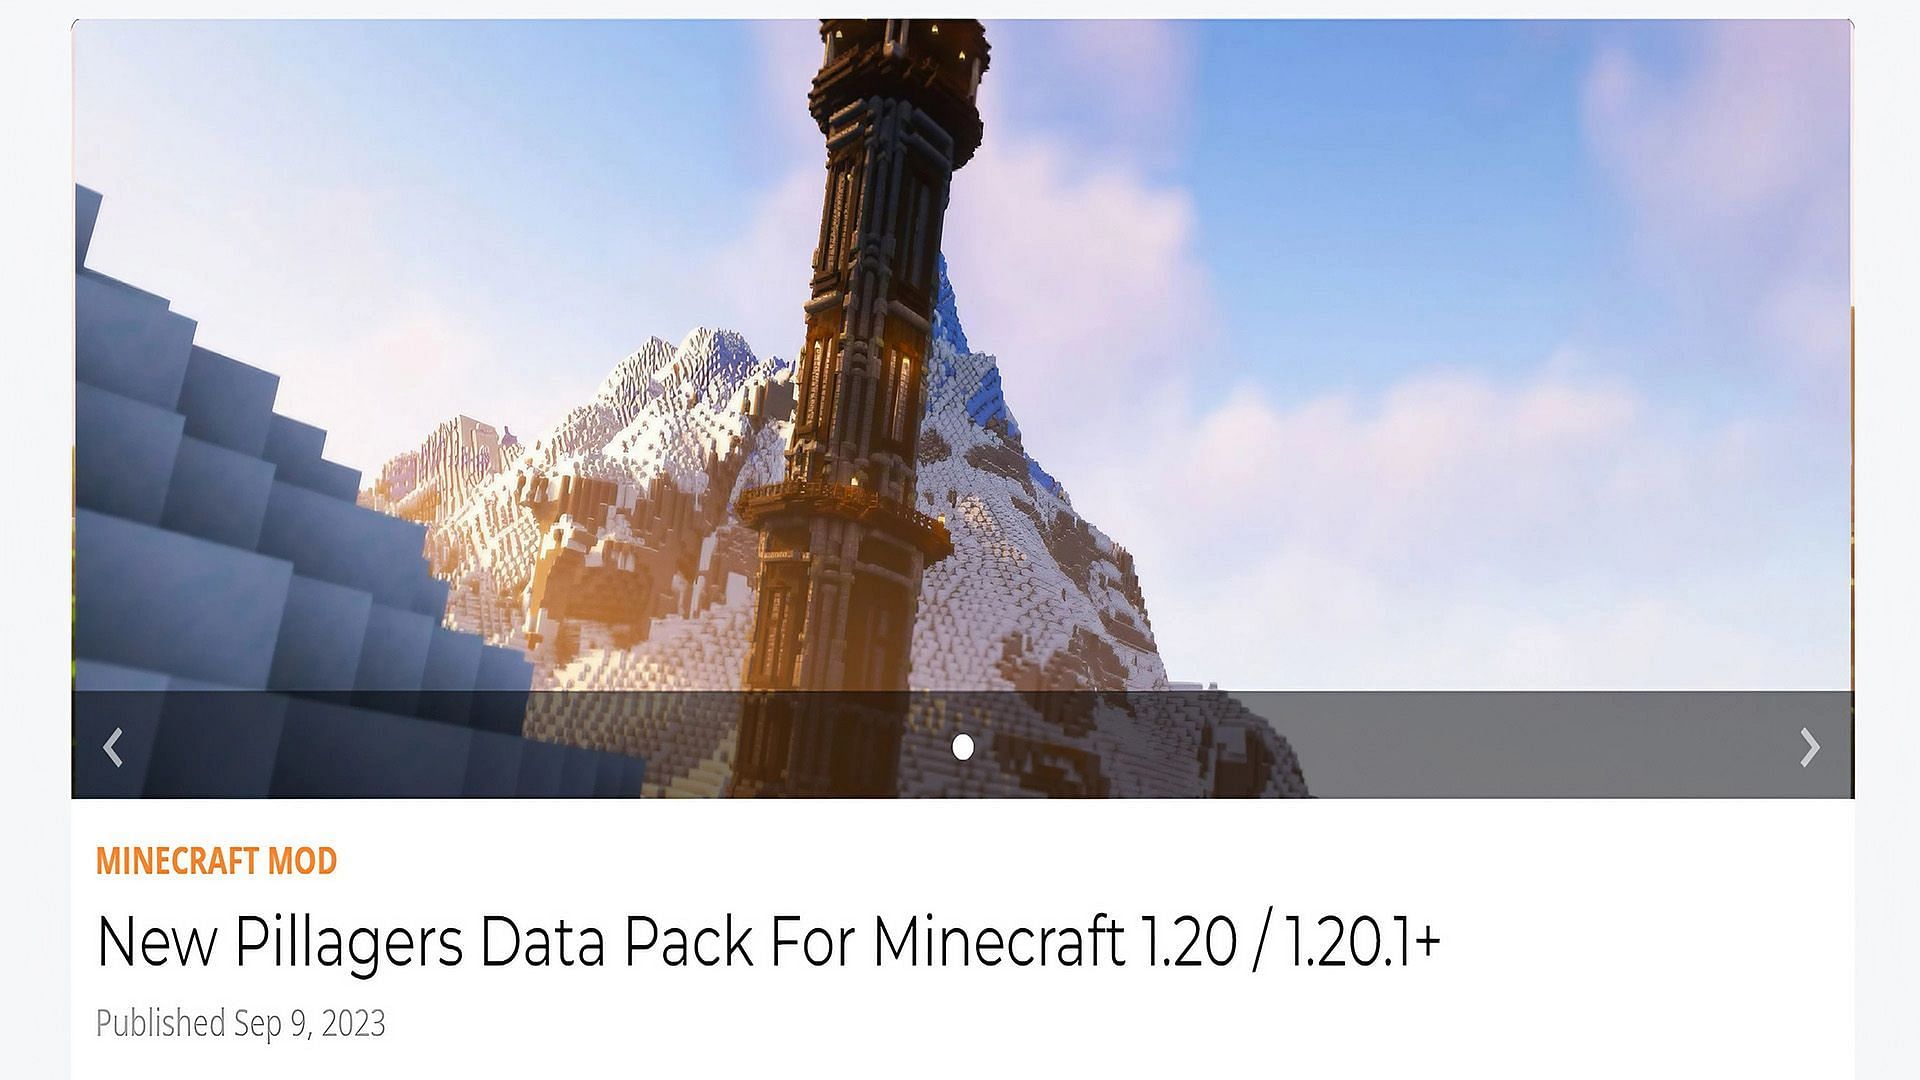 Data packs can change the behavior of mobs (Image via minecrafthub.com)